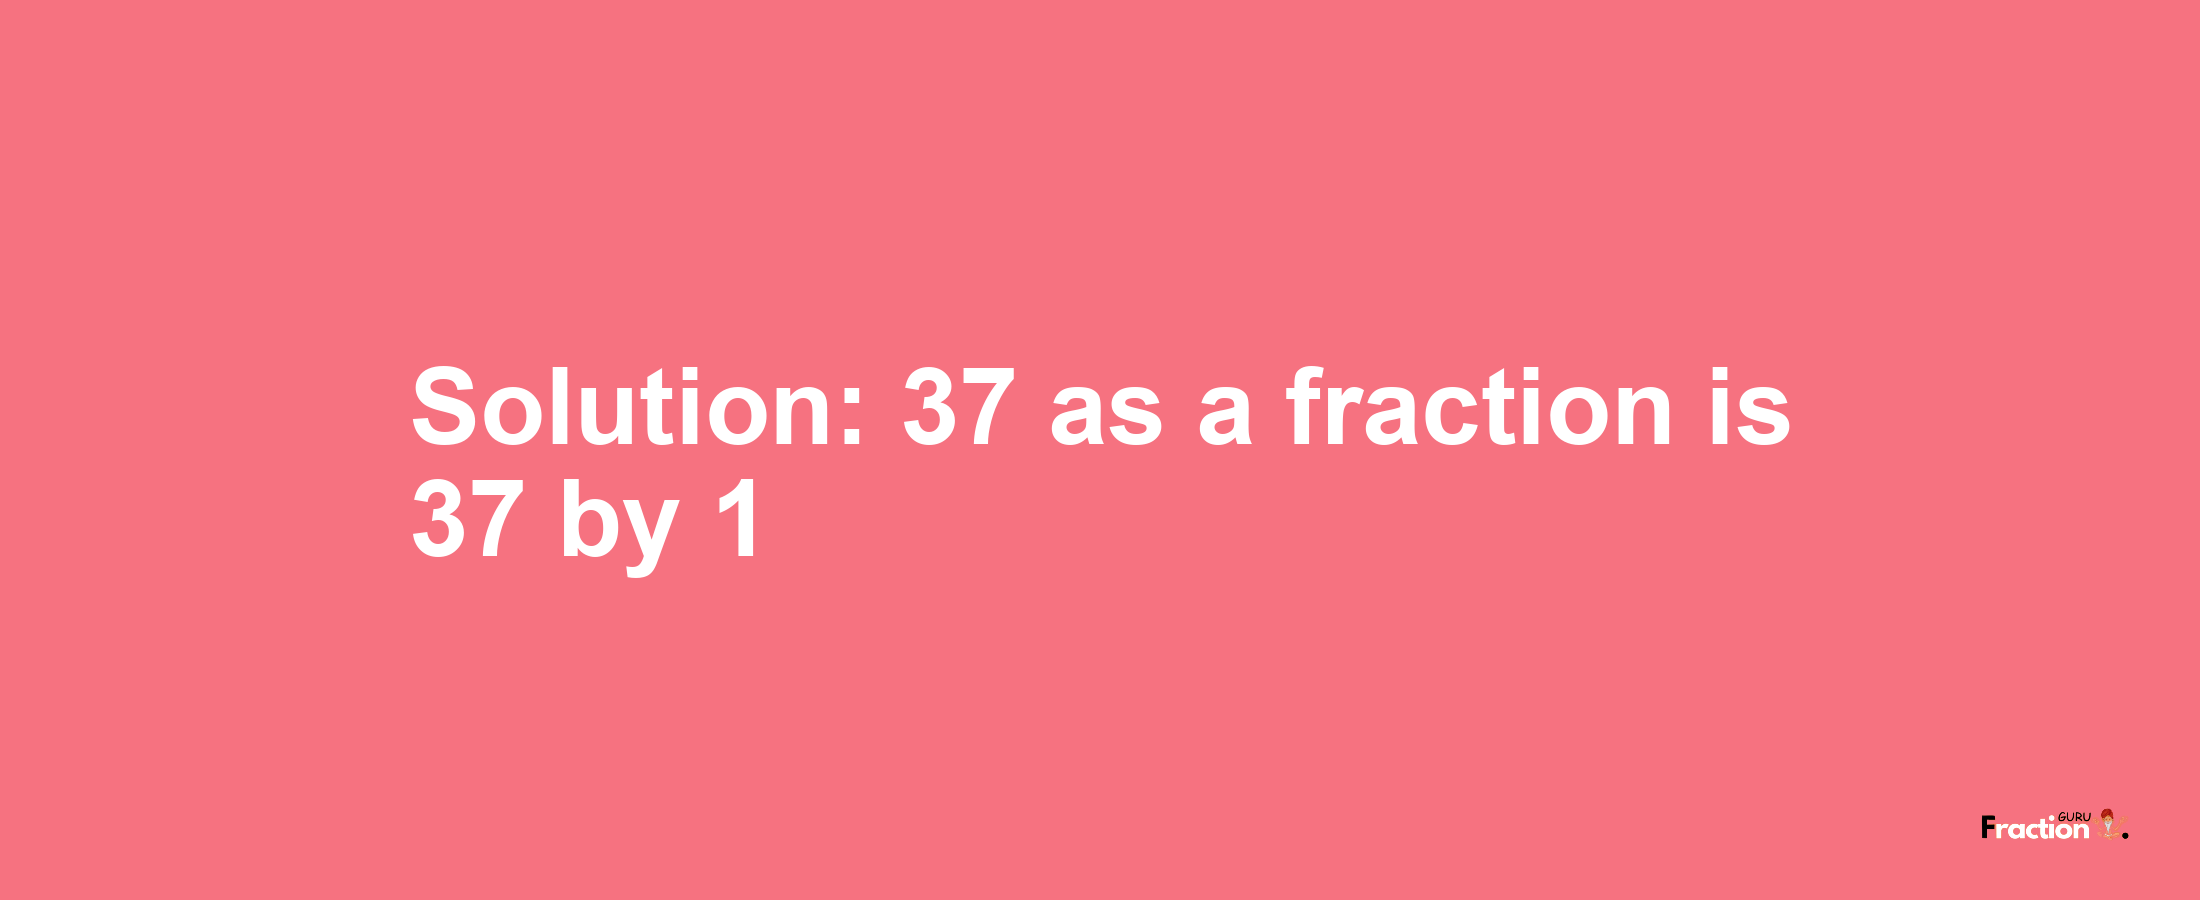 Solution:37 as a fraction is 37/1